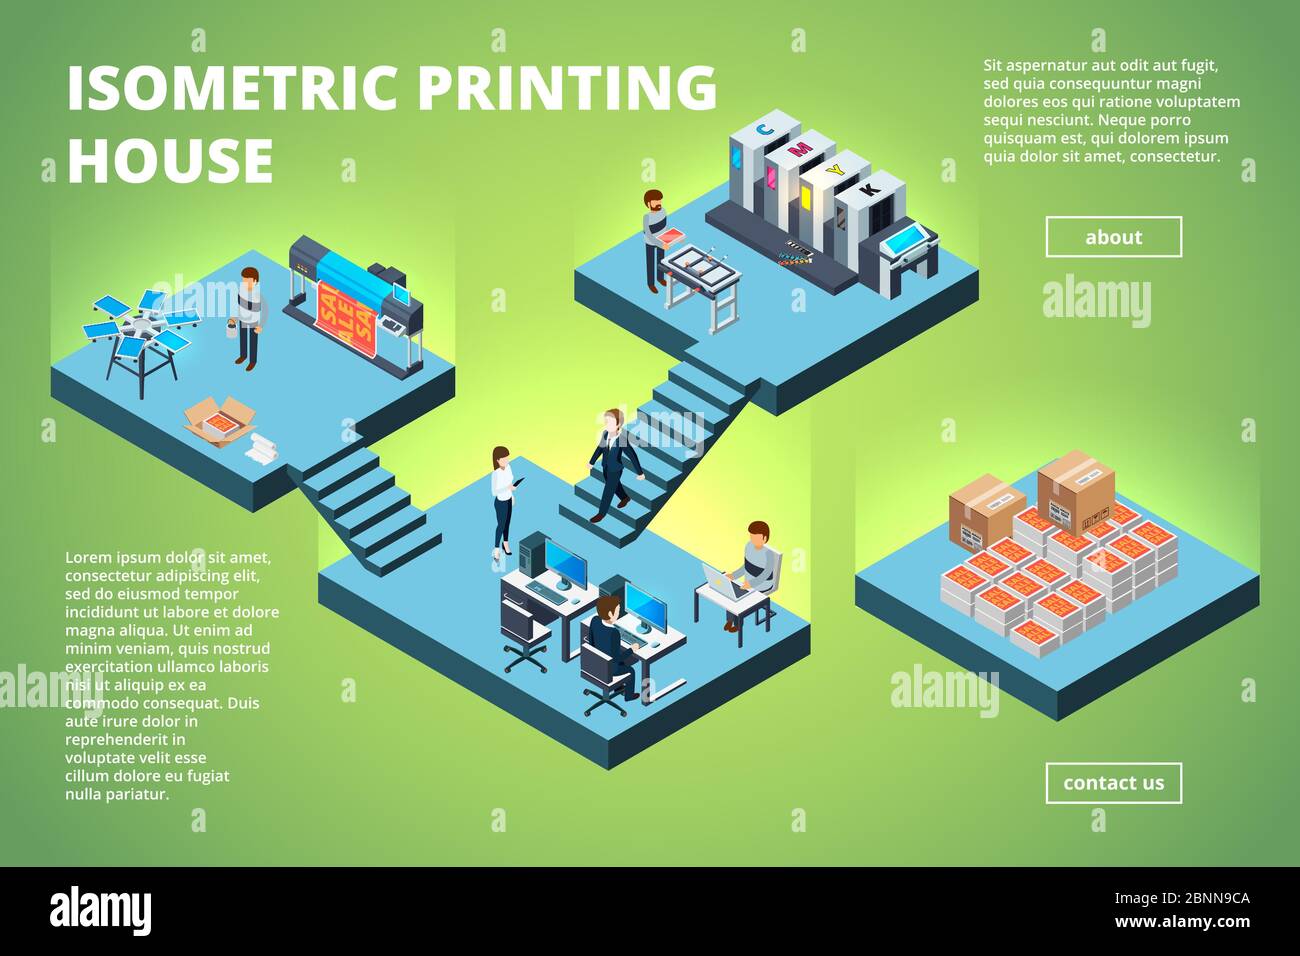 Printing house building. Industrial print production office interior inkjet offset publishing machines copier printer vector isometric Stock Vector